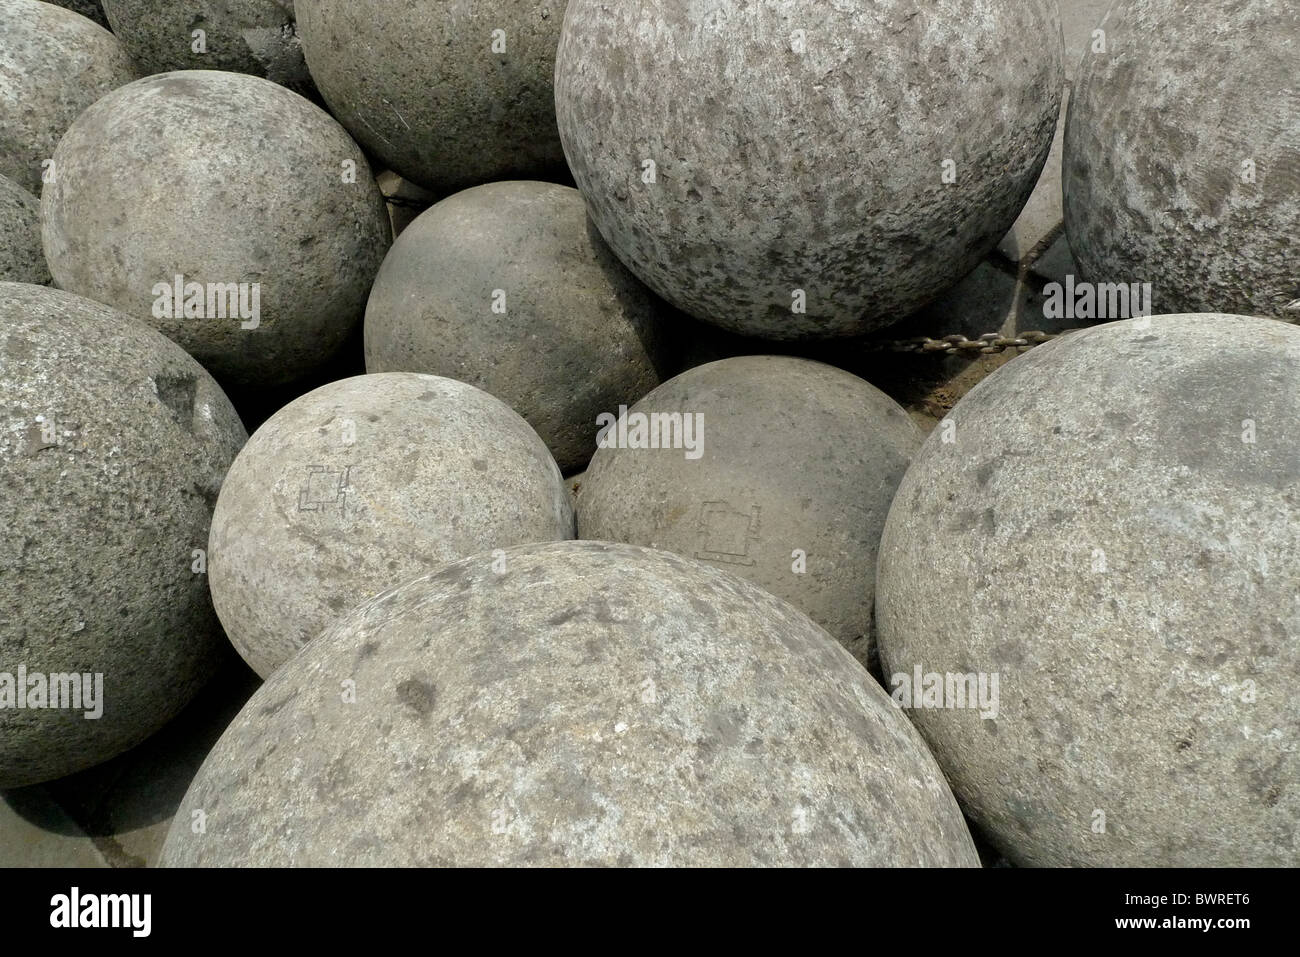 balls of stone, in differing sizes and weights. Stock Photo